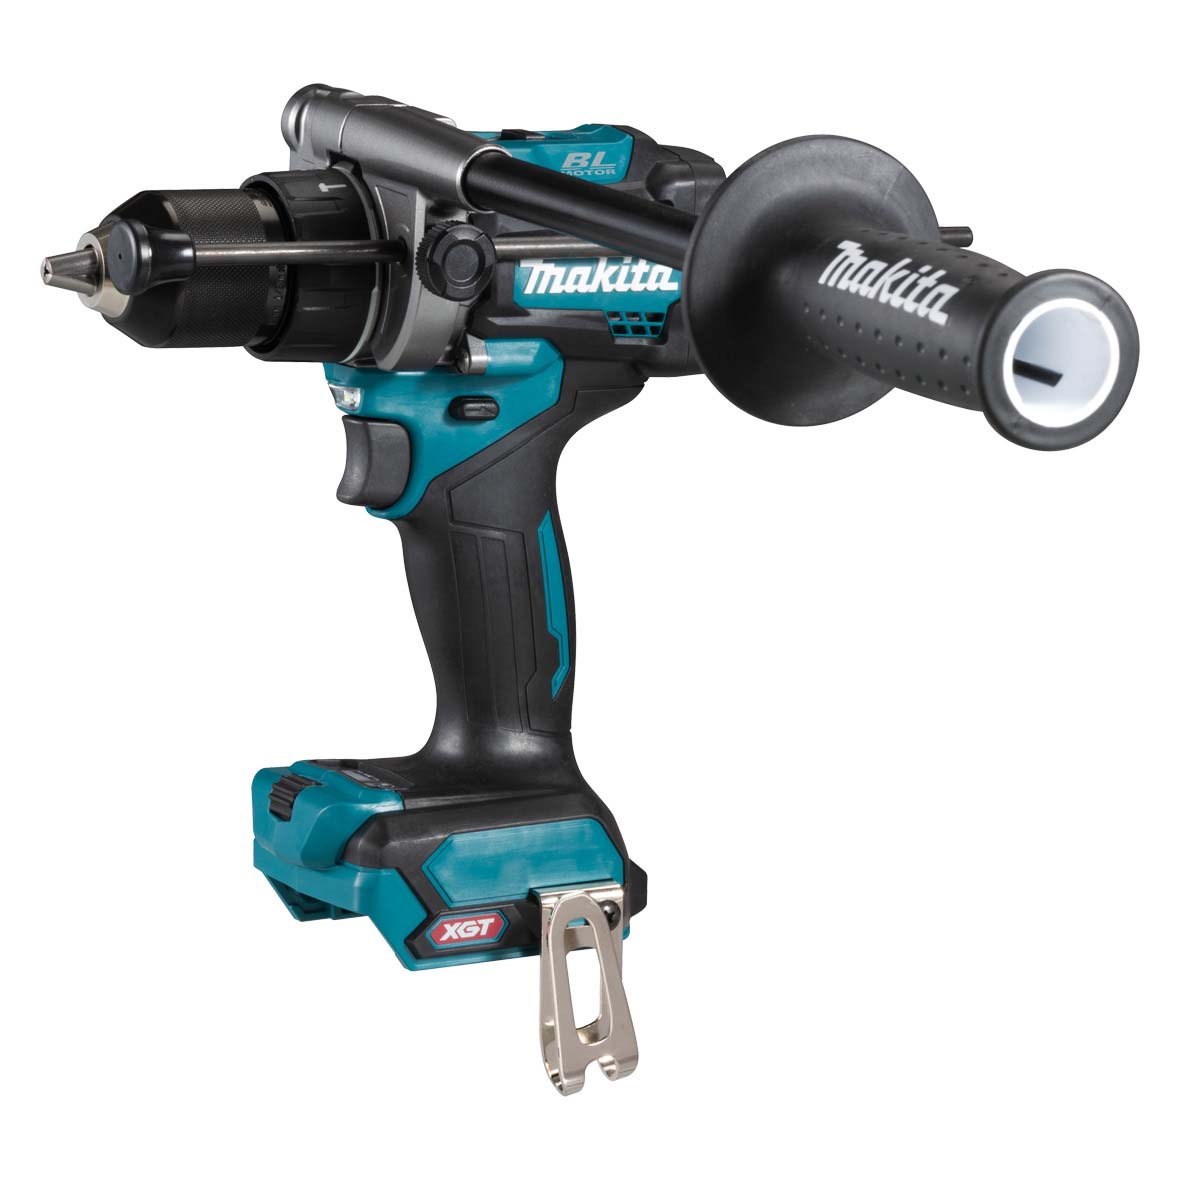 40V Brushless Hammer Driver Drill Bare (Tool Only) HP001GZ by Makita